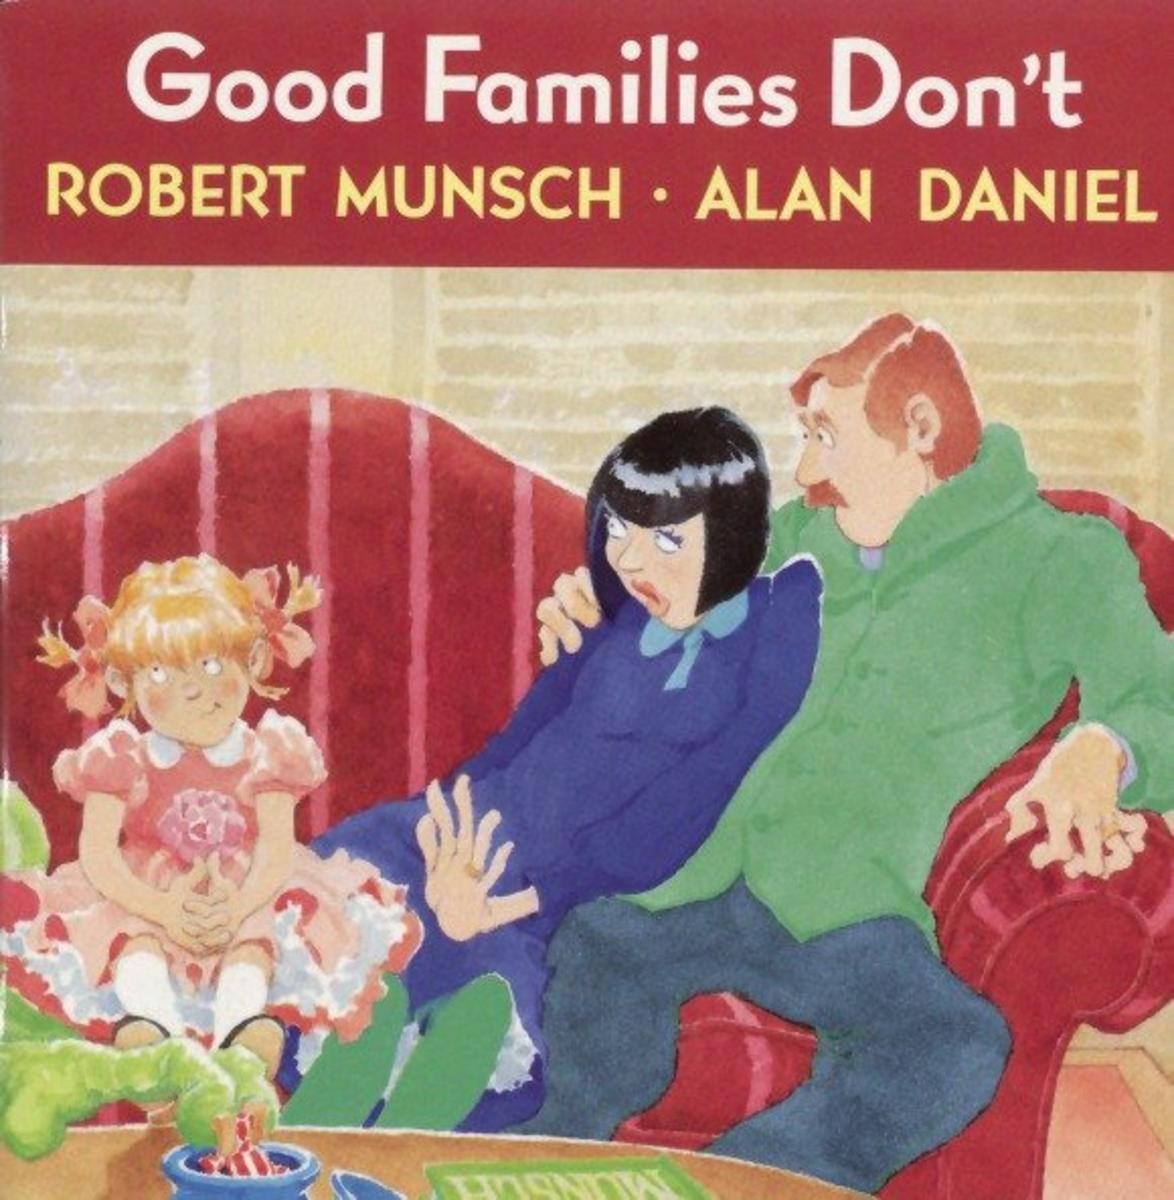 Good Families Don't - 